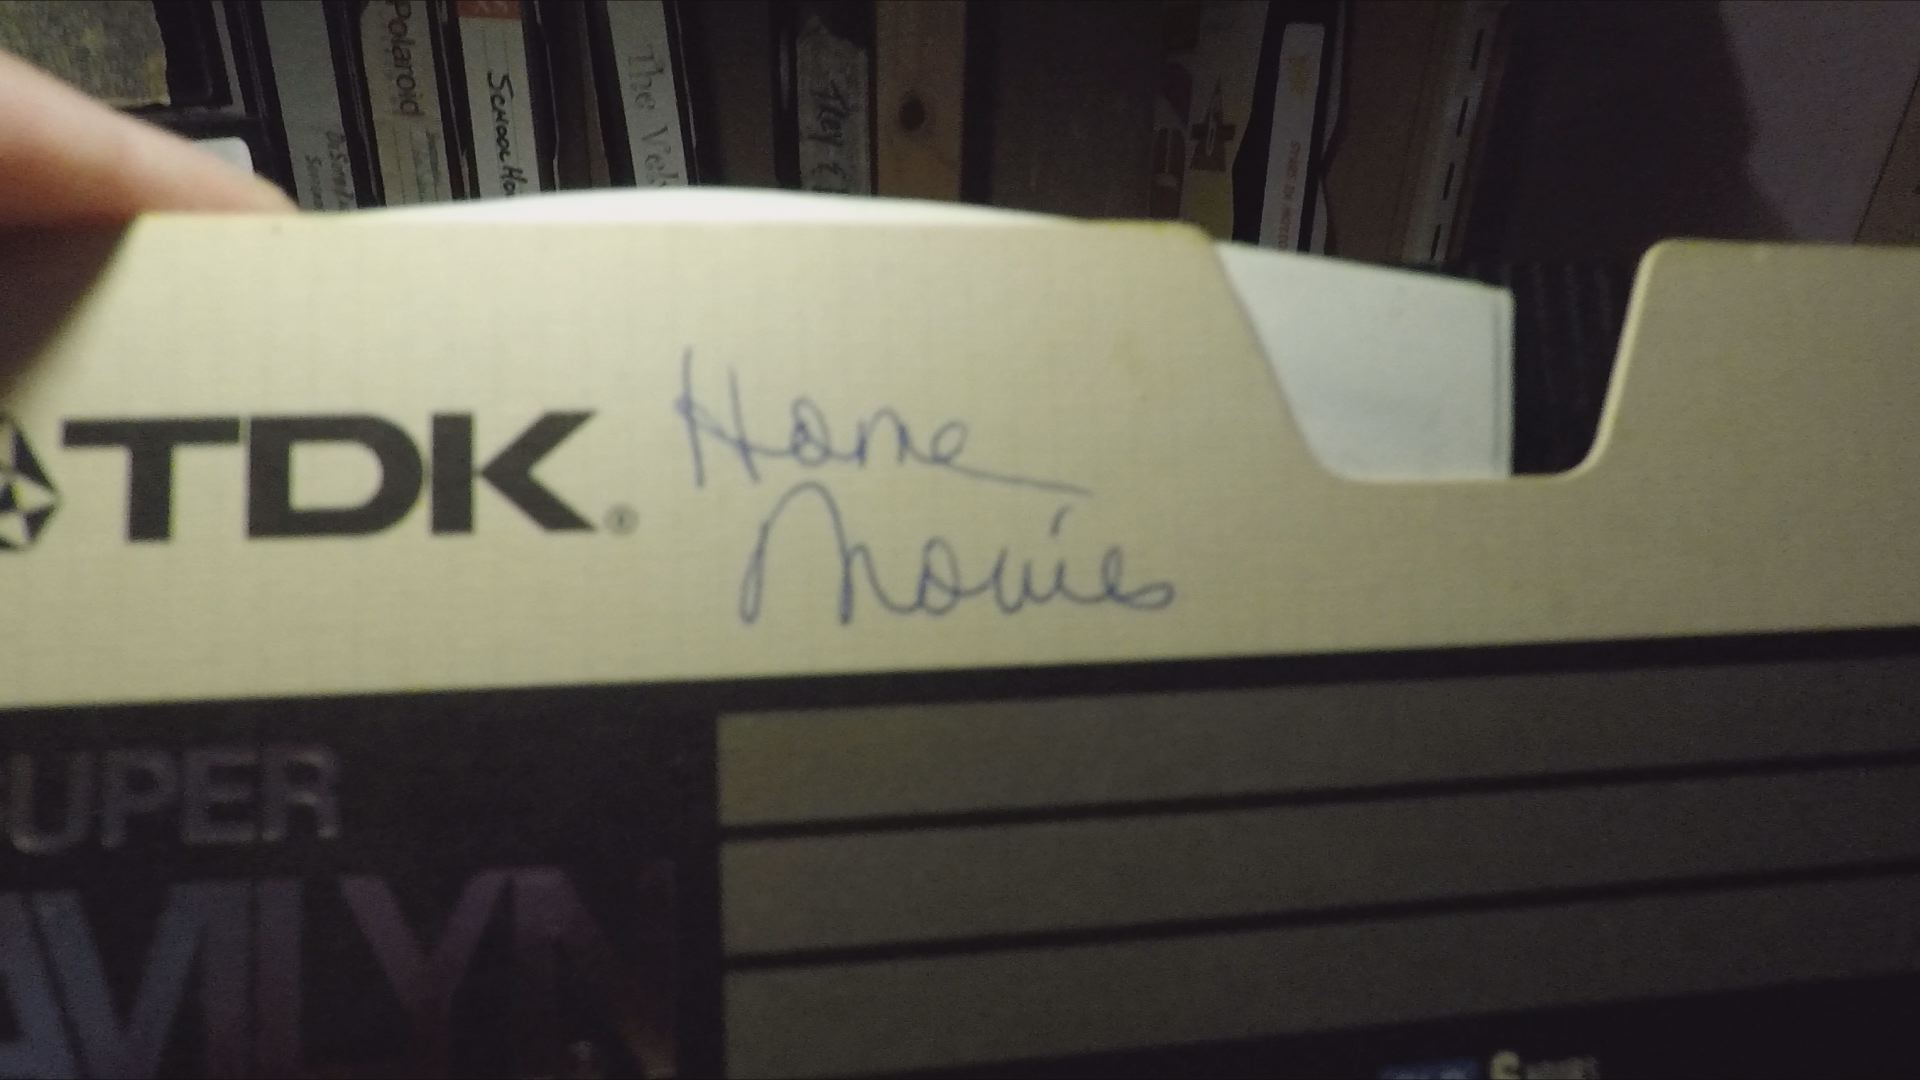 How to Save or Rescue Old Home Movie Videotapes - What the Tech?